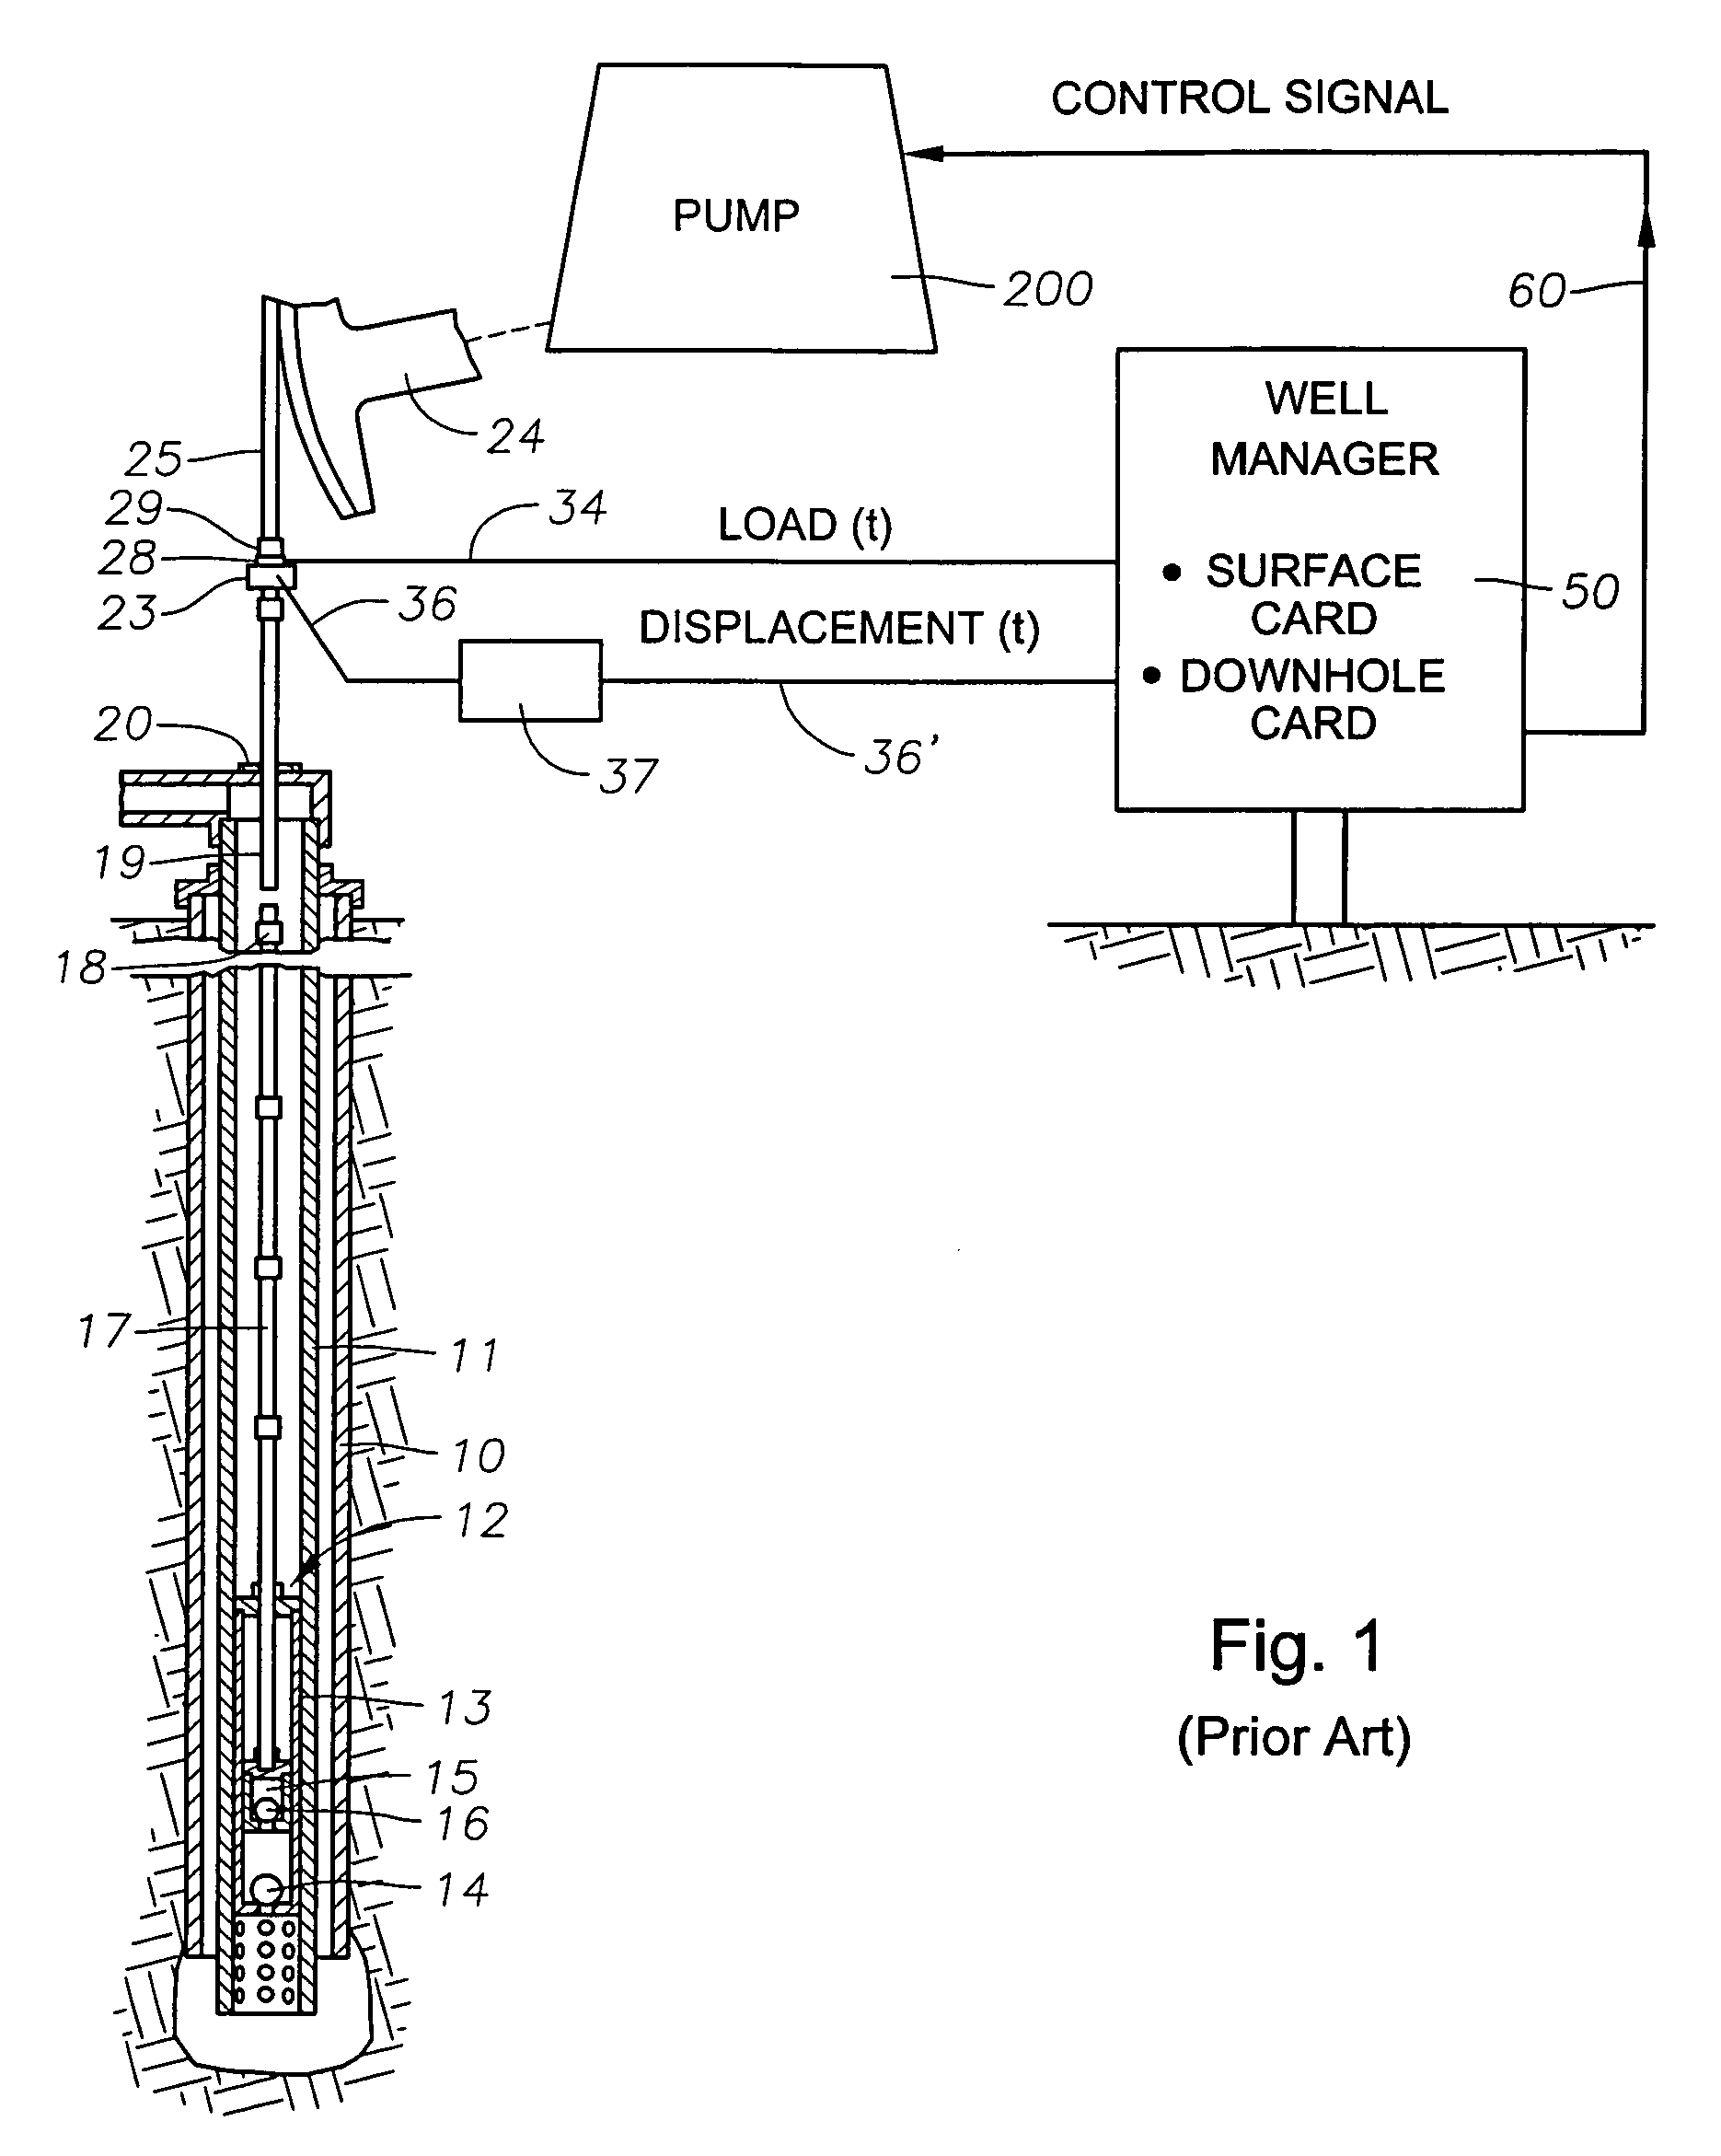 Apparatus for analysis and control of a reciprocating pump system by determination of a pump card